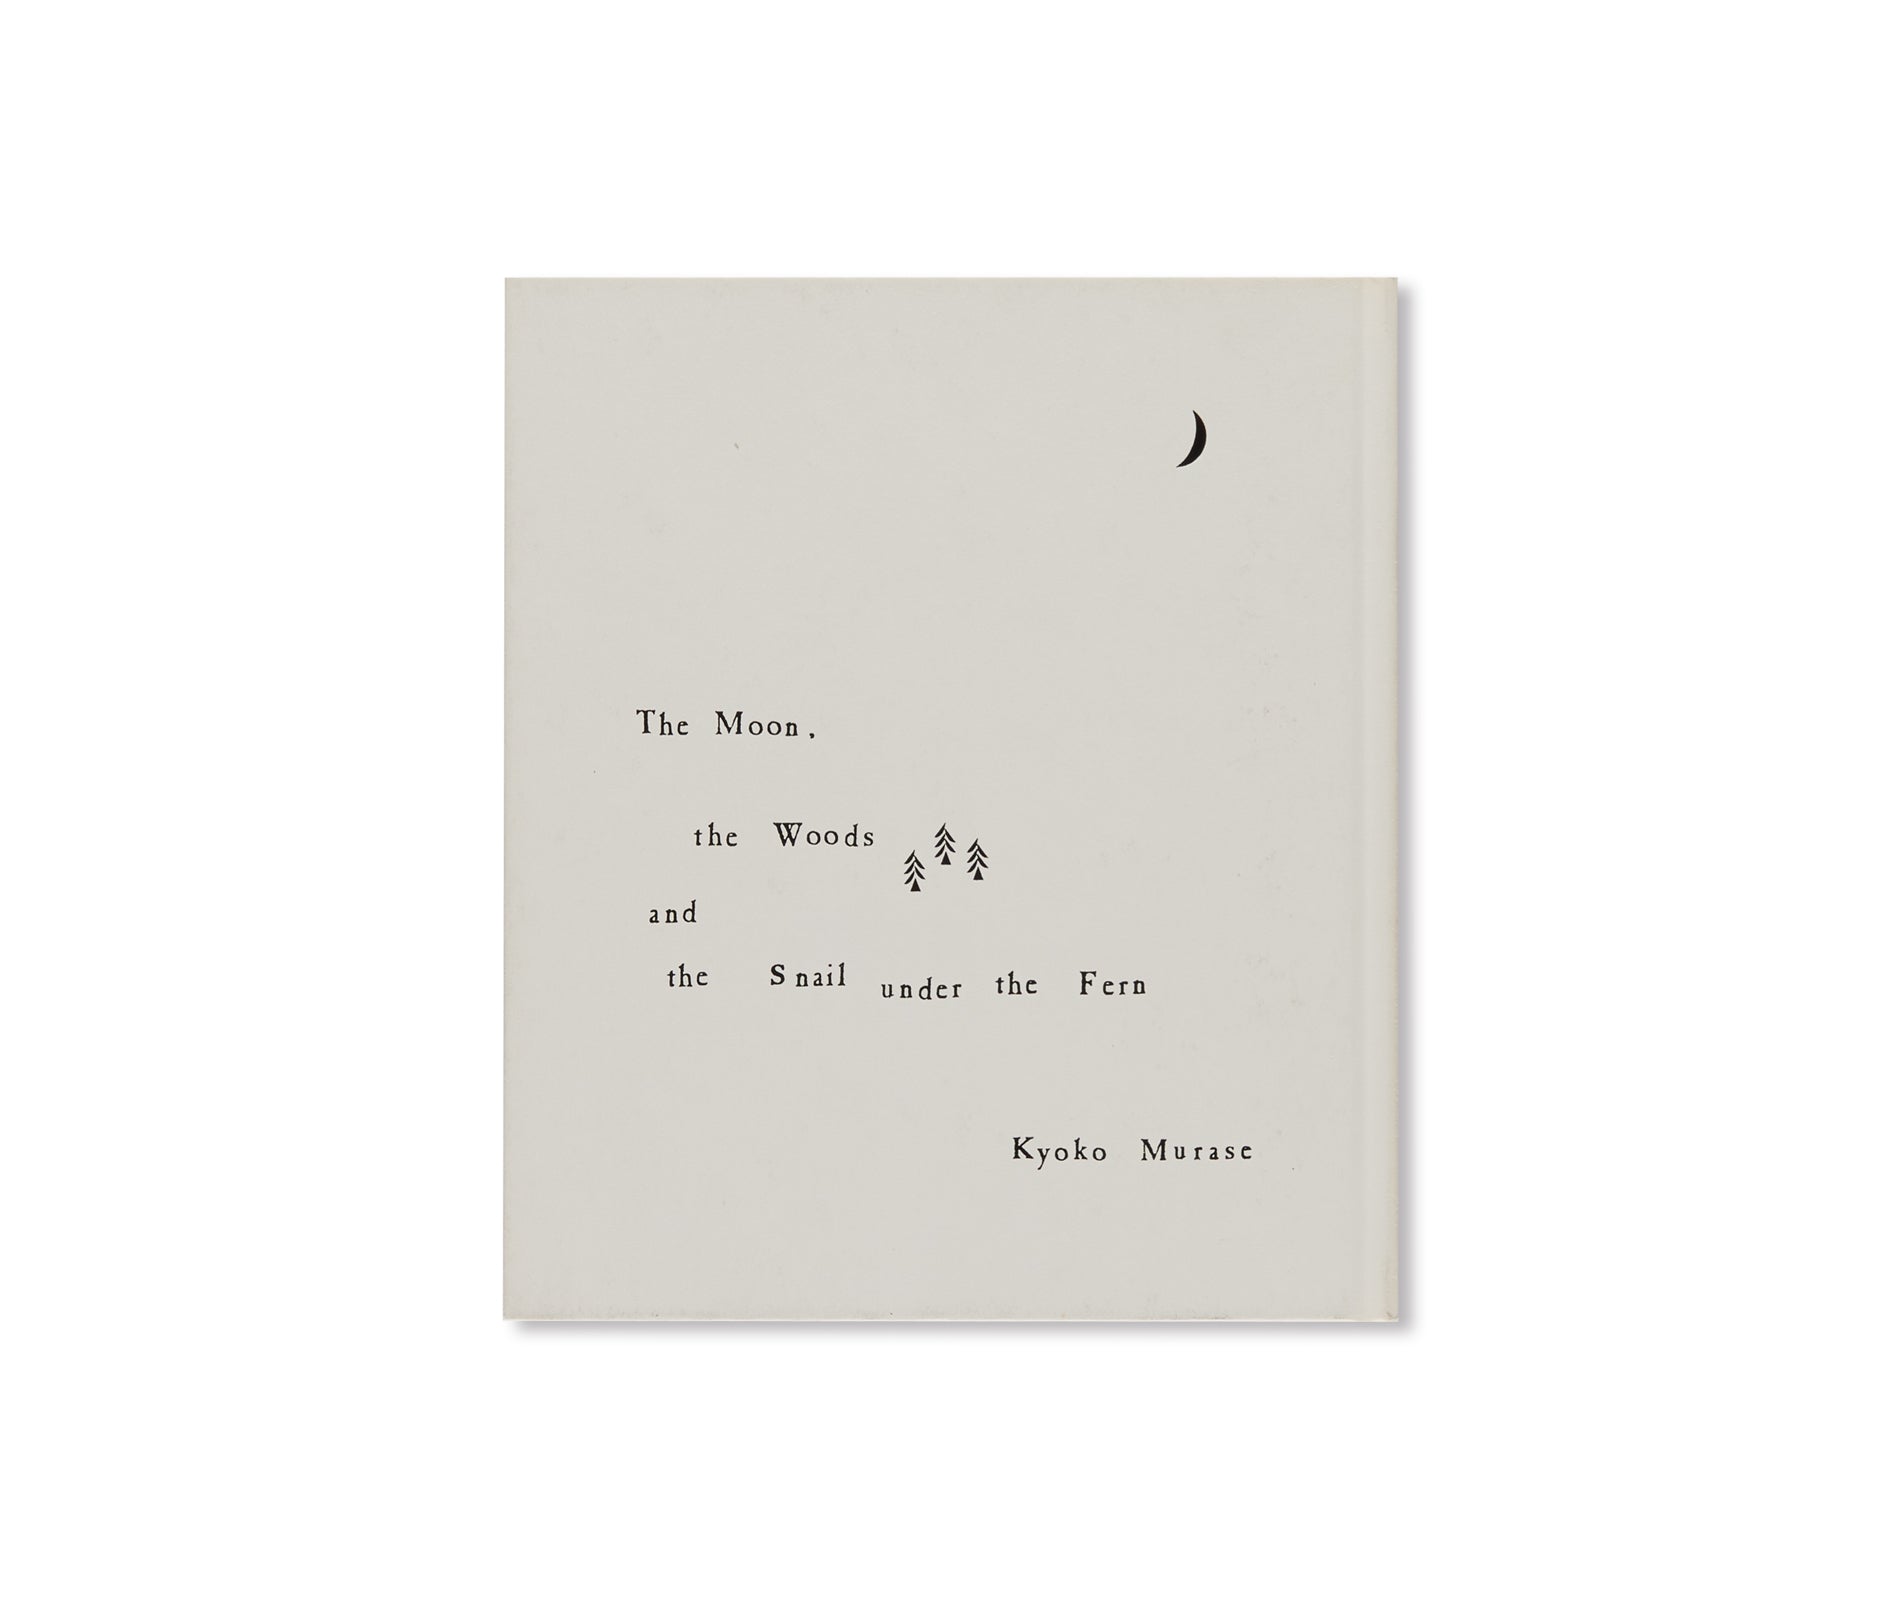 THE MOON, THE WOODS AND THE SNAIL UNDER THE FERN by Kyoko Murase